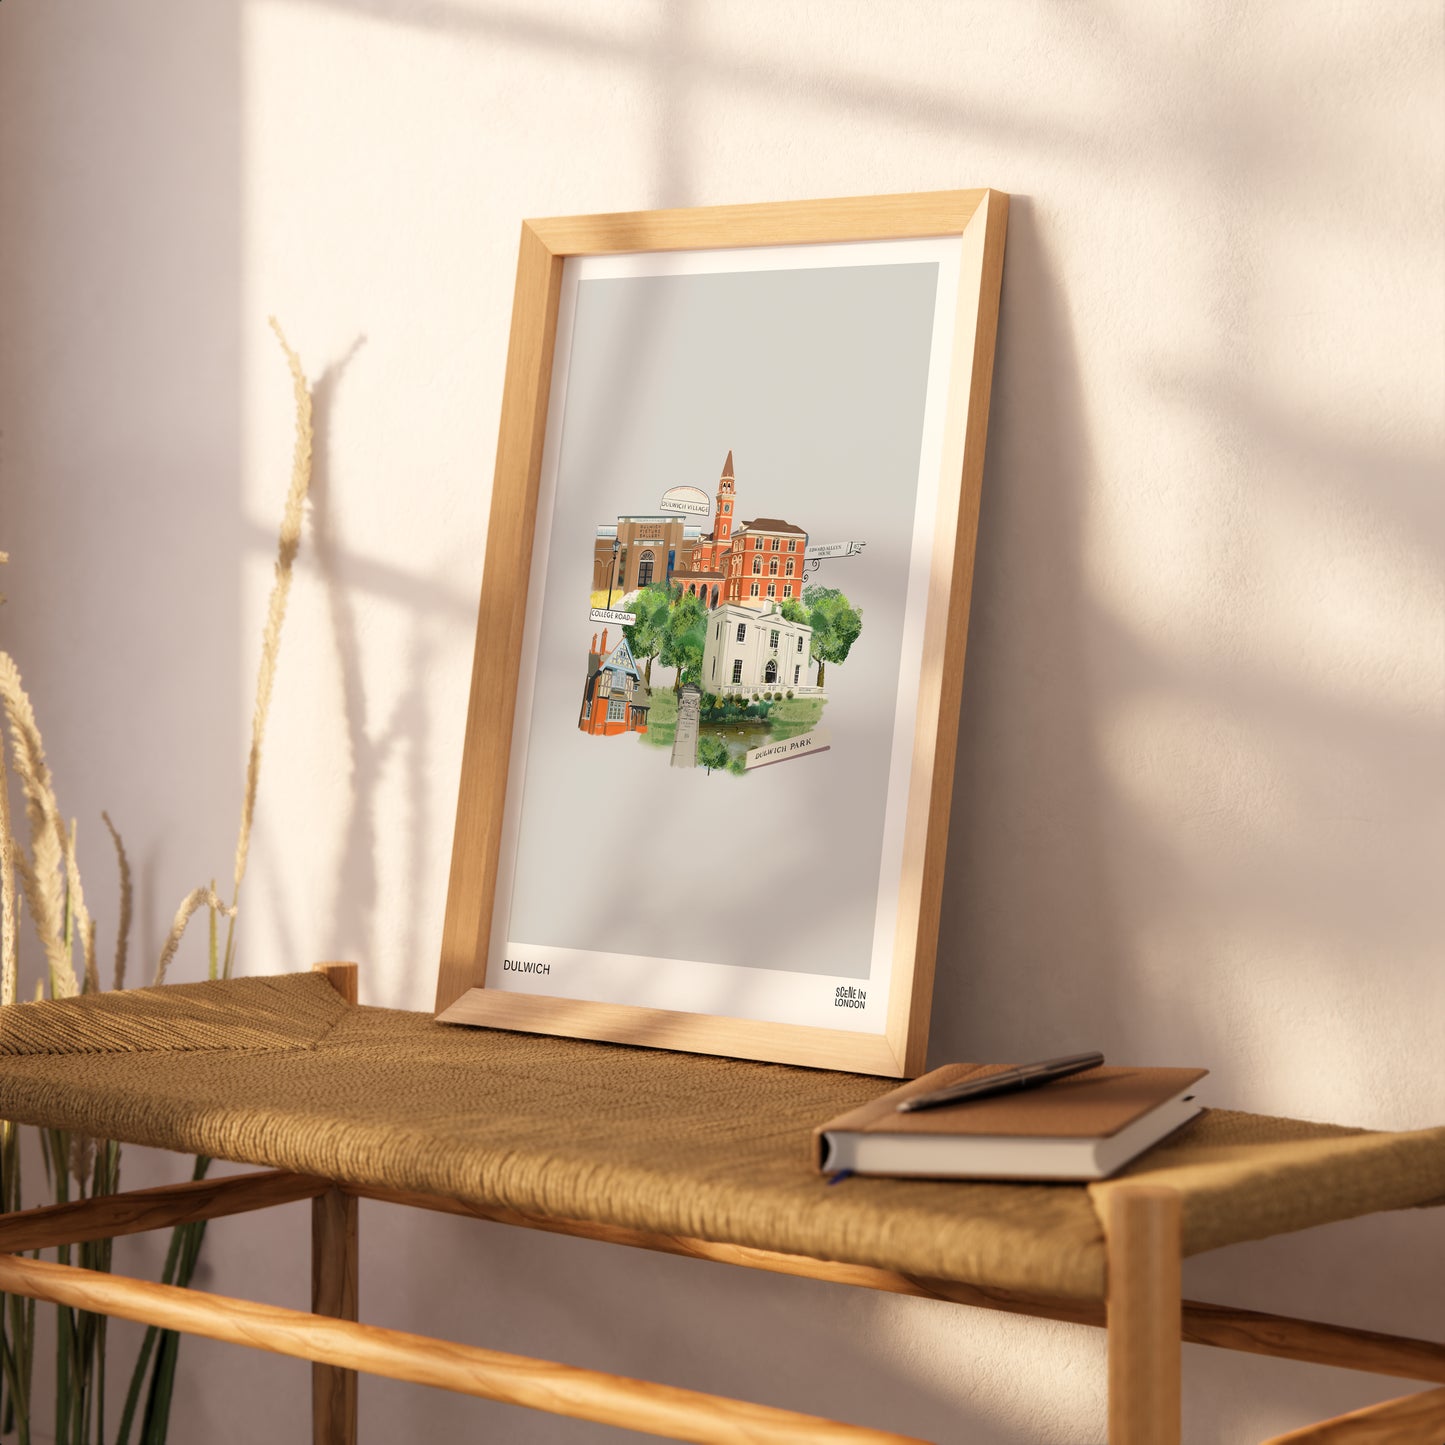 Dulwich print featuring places in Dulwich, London